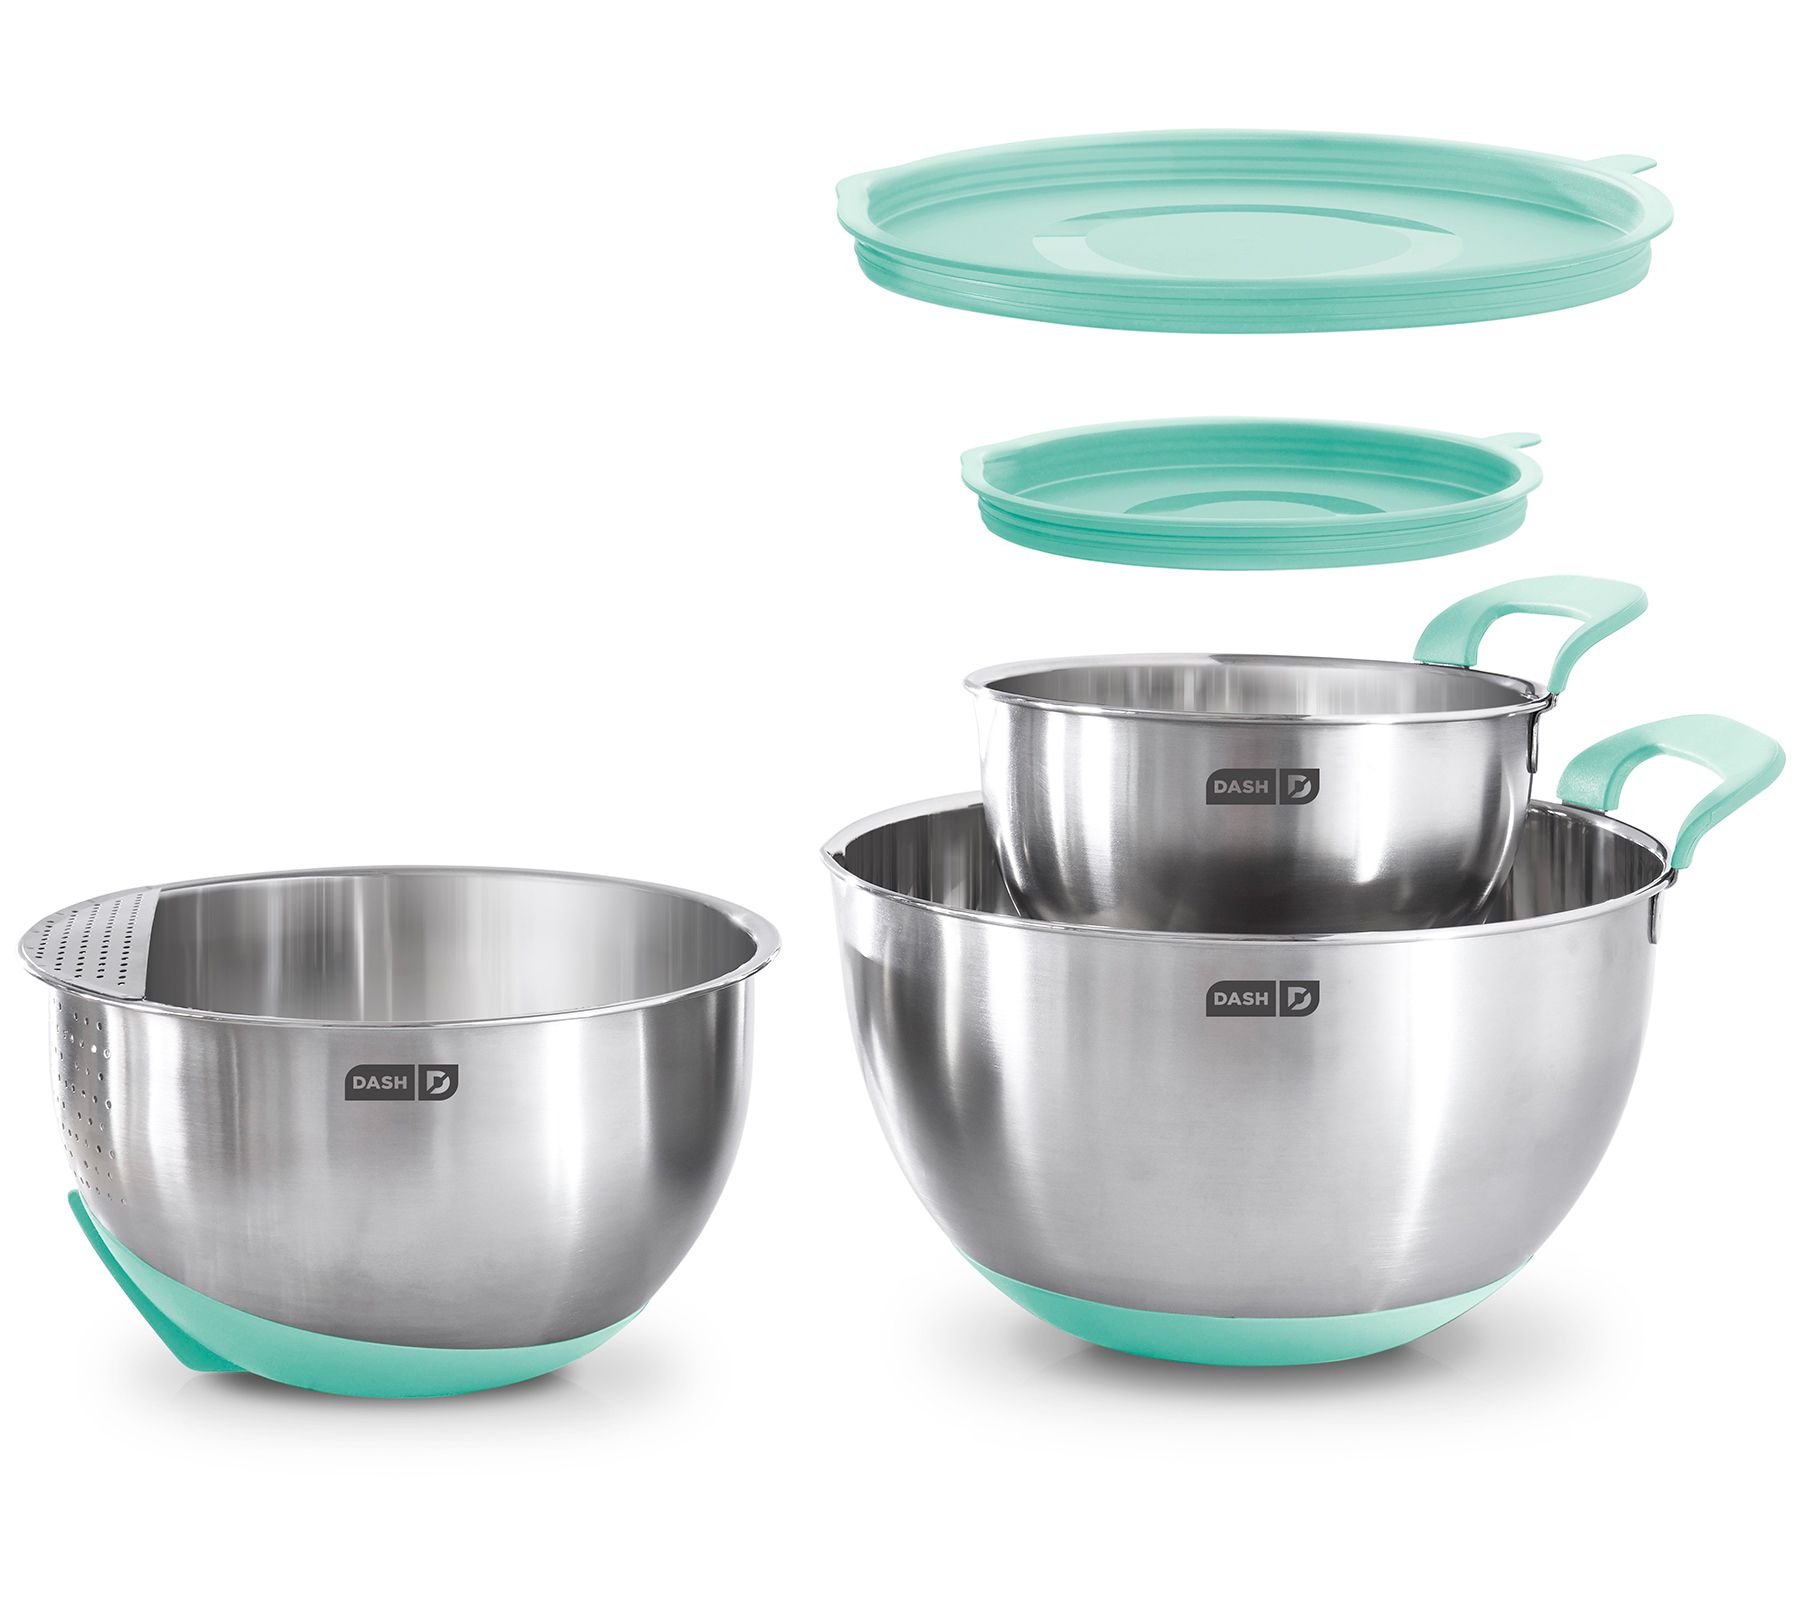 5 pc. Stainless Steel Mixing Bowl Set